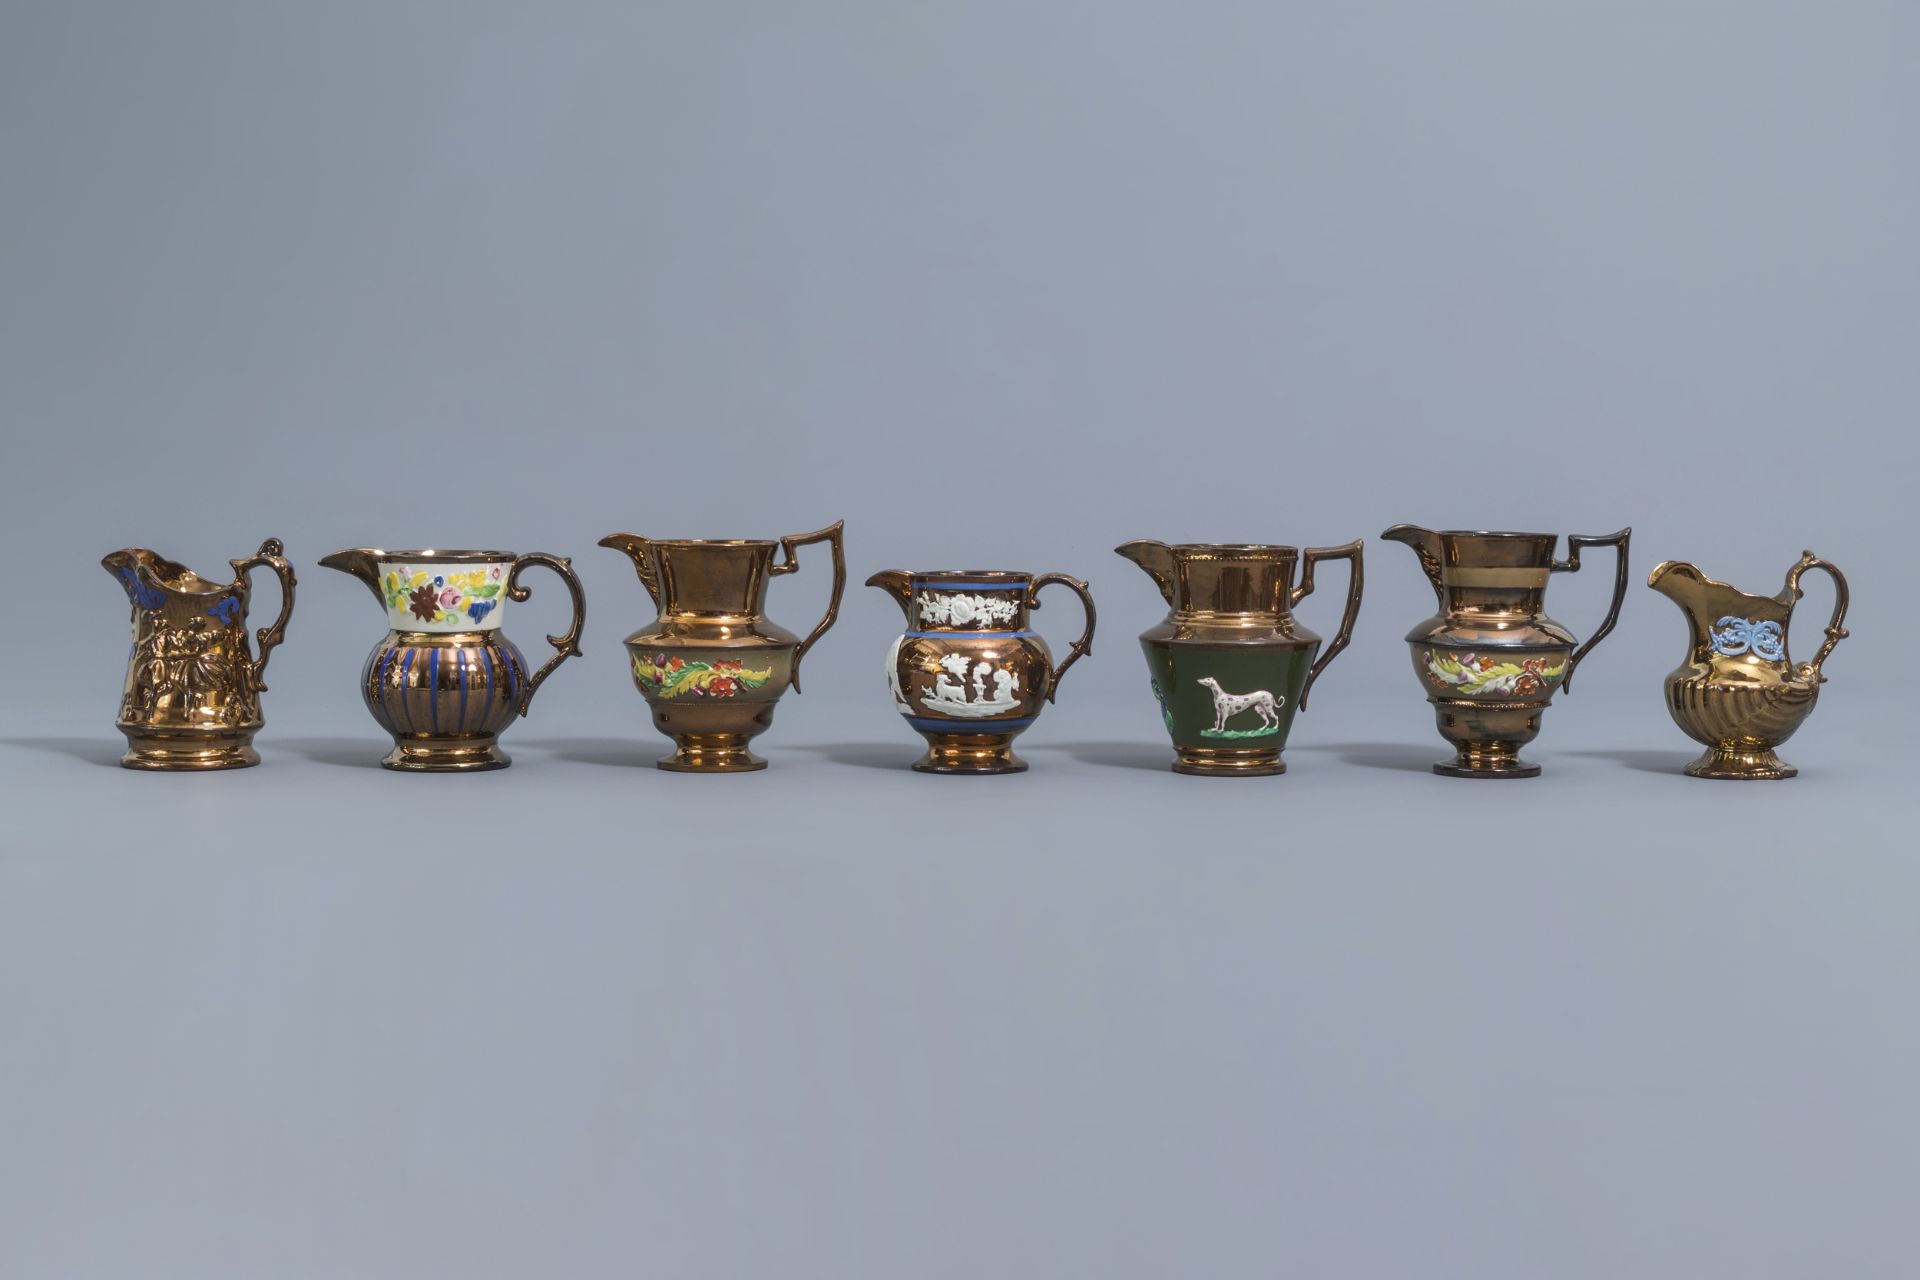 A varied collection of English lustreware items with relief design, 19th C. - Image 19 of 50